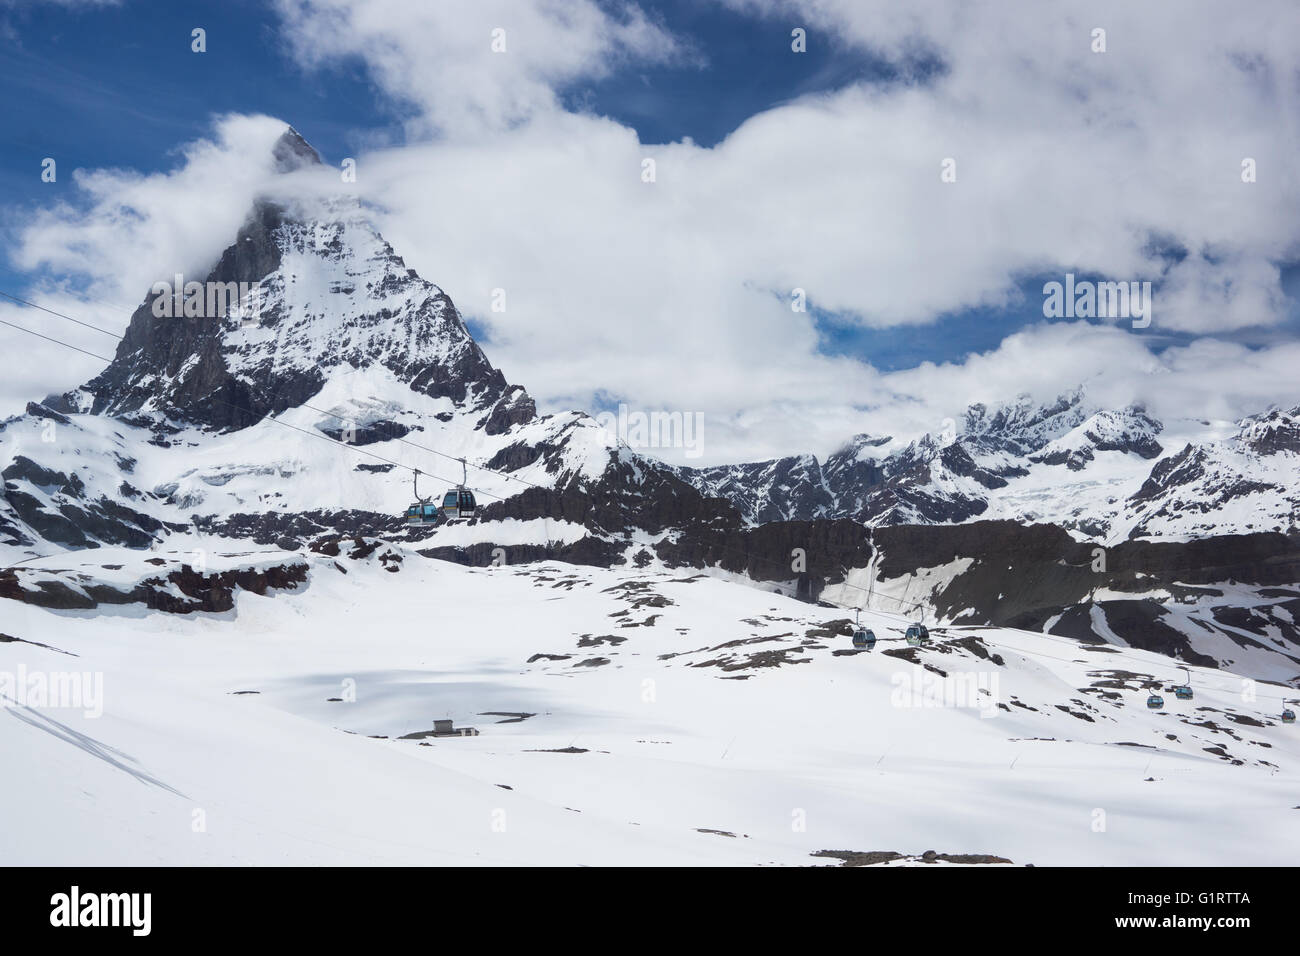 The Matterhorn, Switzerland with cable cars Stock Photo